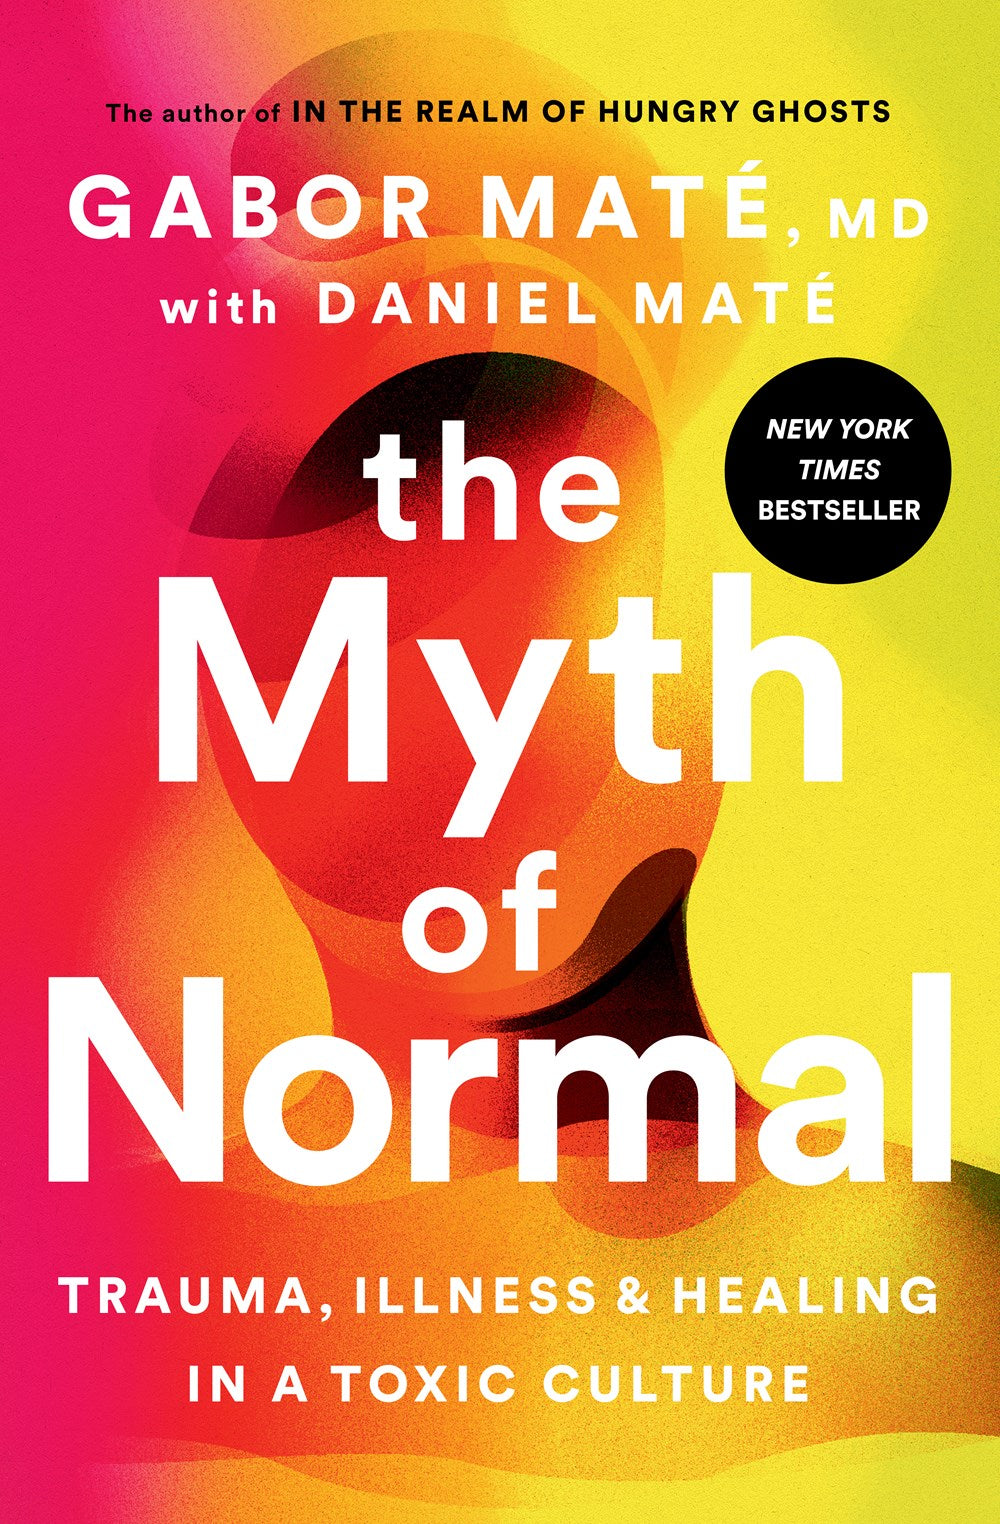 The Myth of Normal: Trauma, Illness and Healing in a Toxic Culture by Gabor Maté MD, with Daniel Maté